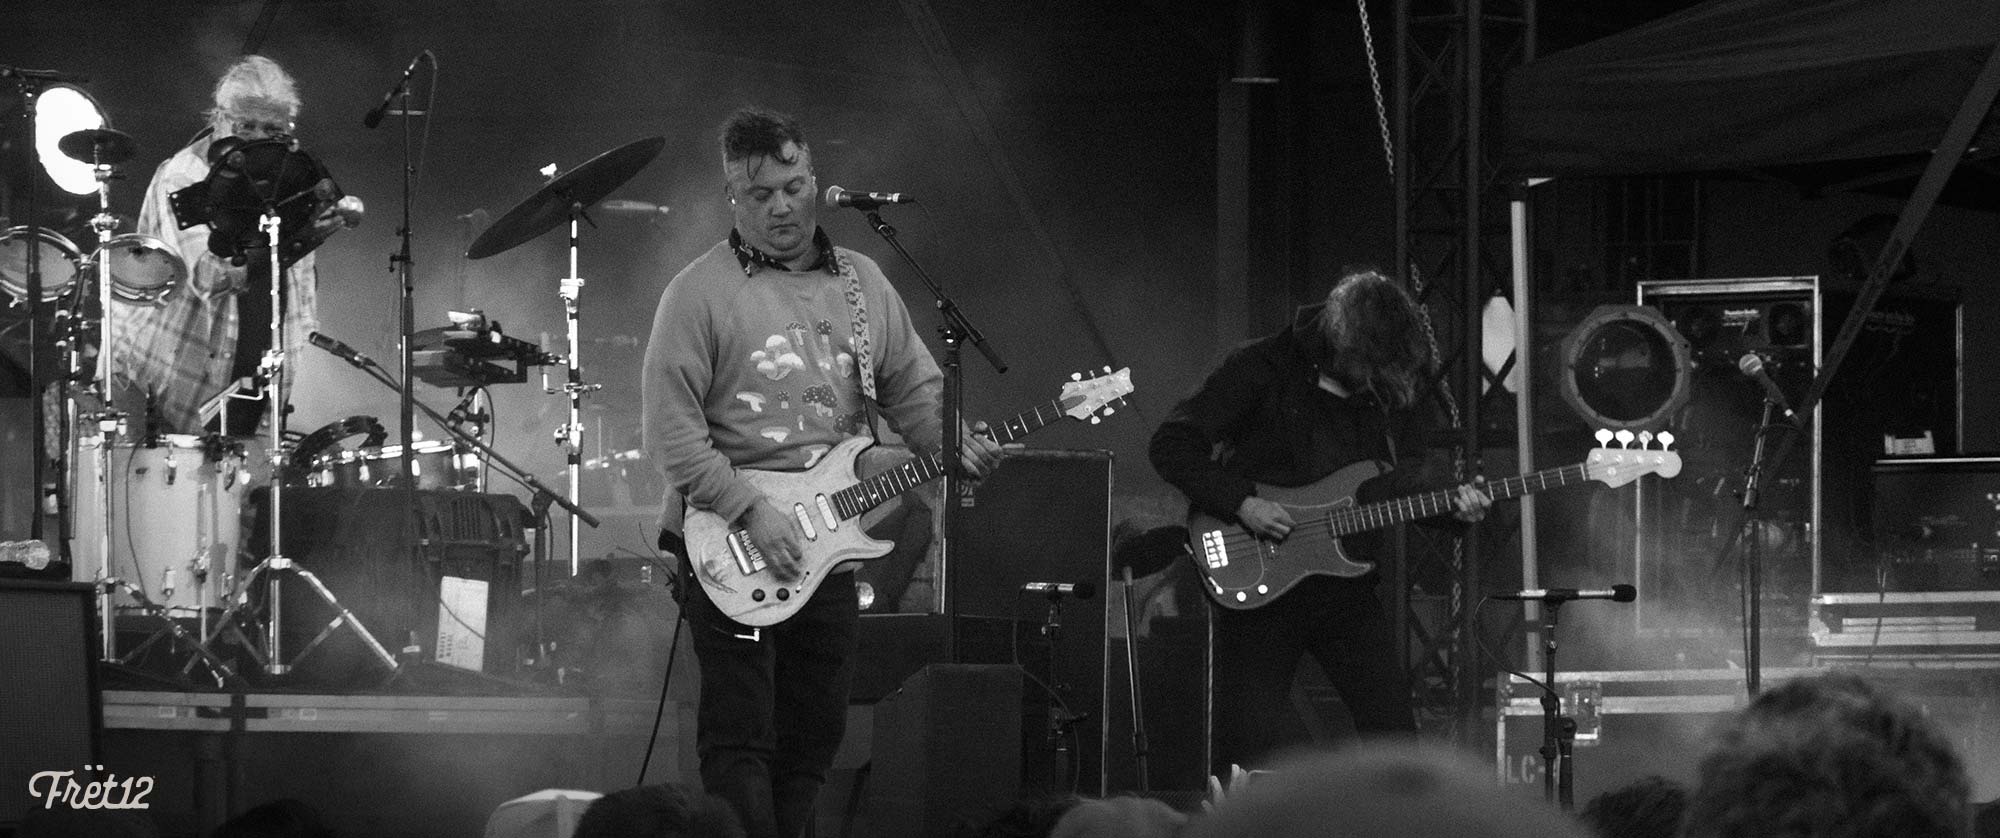 Modest Mouse at The Salt Shed - Photos by FRET12